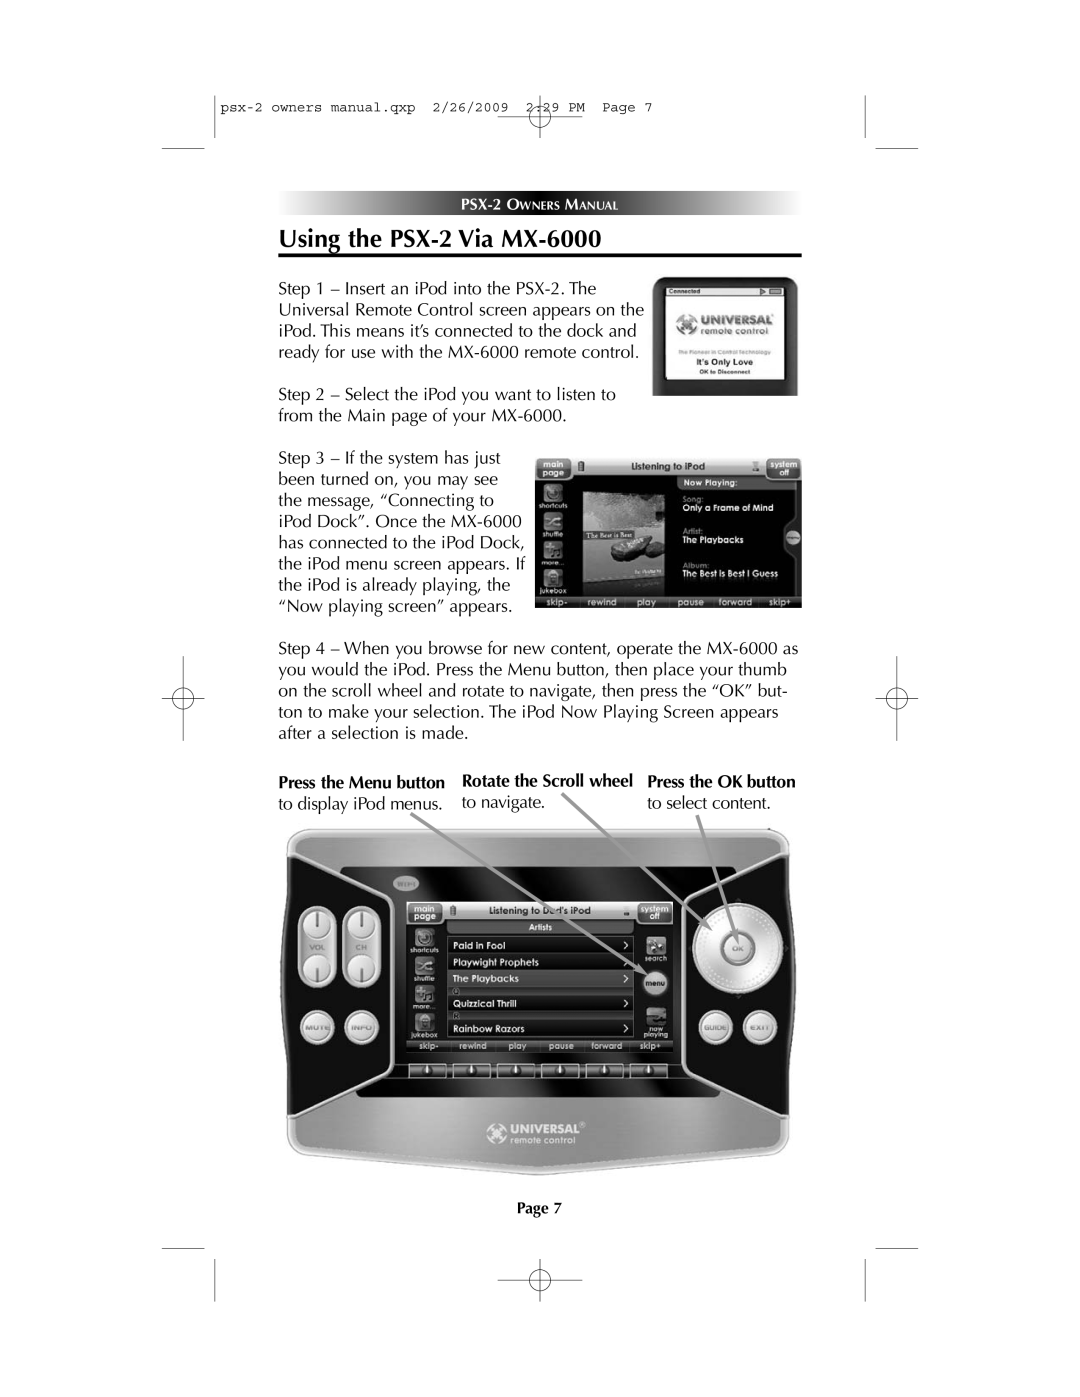 Universal owner manual Using the PSX-2 Via MX-6000 